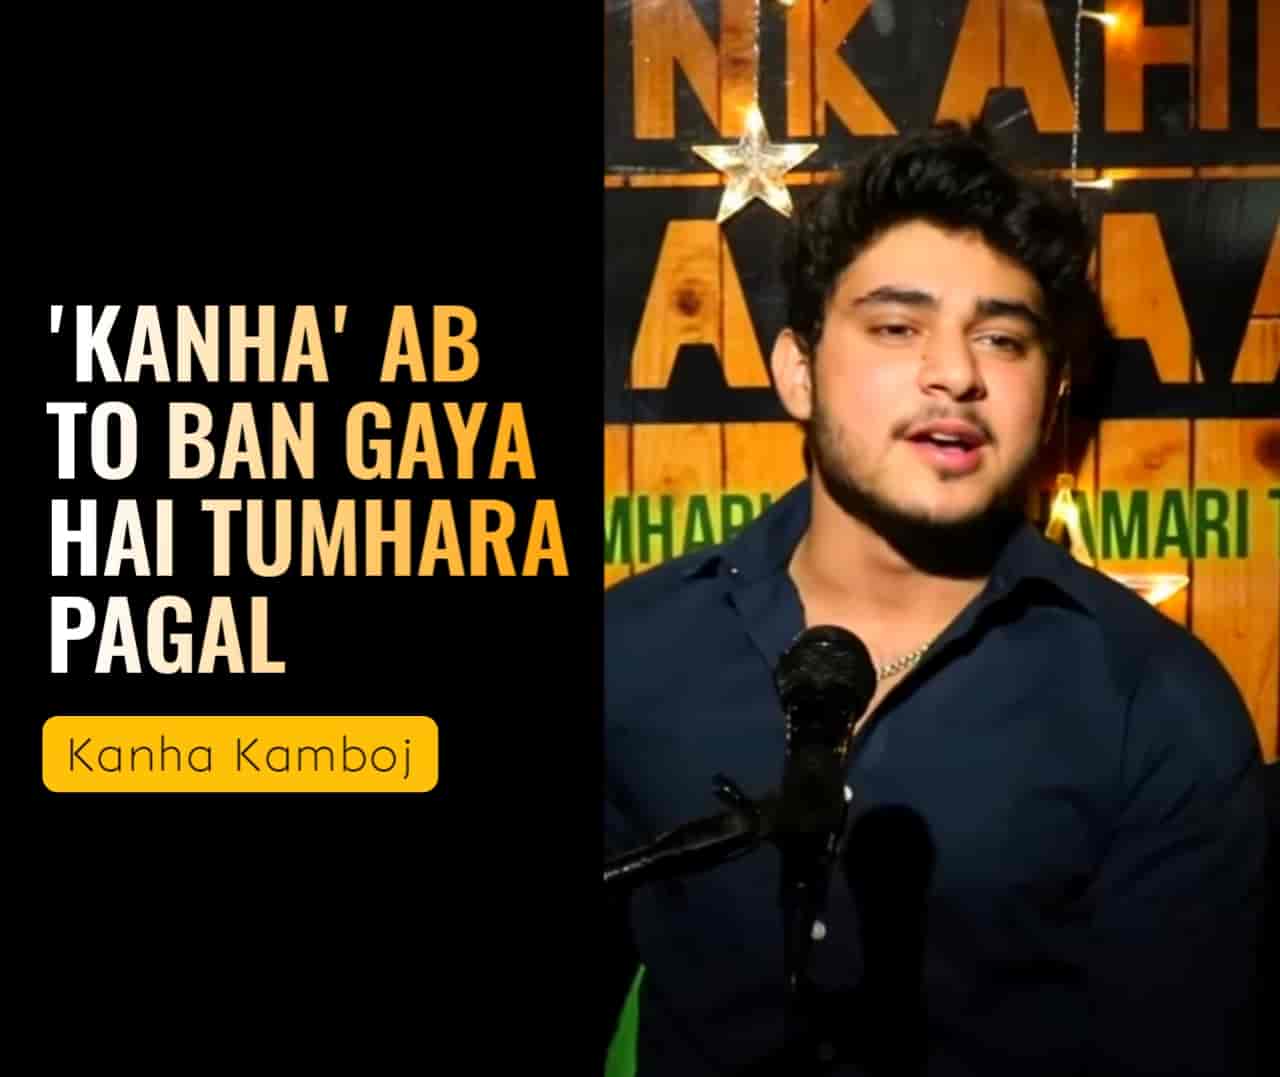 This beautiful Poetry  'Kanha Ab To Ban Gaya Hai Tumhara Pagal' for Unkahe Jasbaat is performed by Kanha Kamboj and also written by him which is very beautiful a piece.